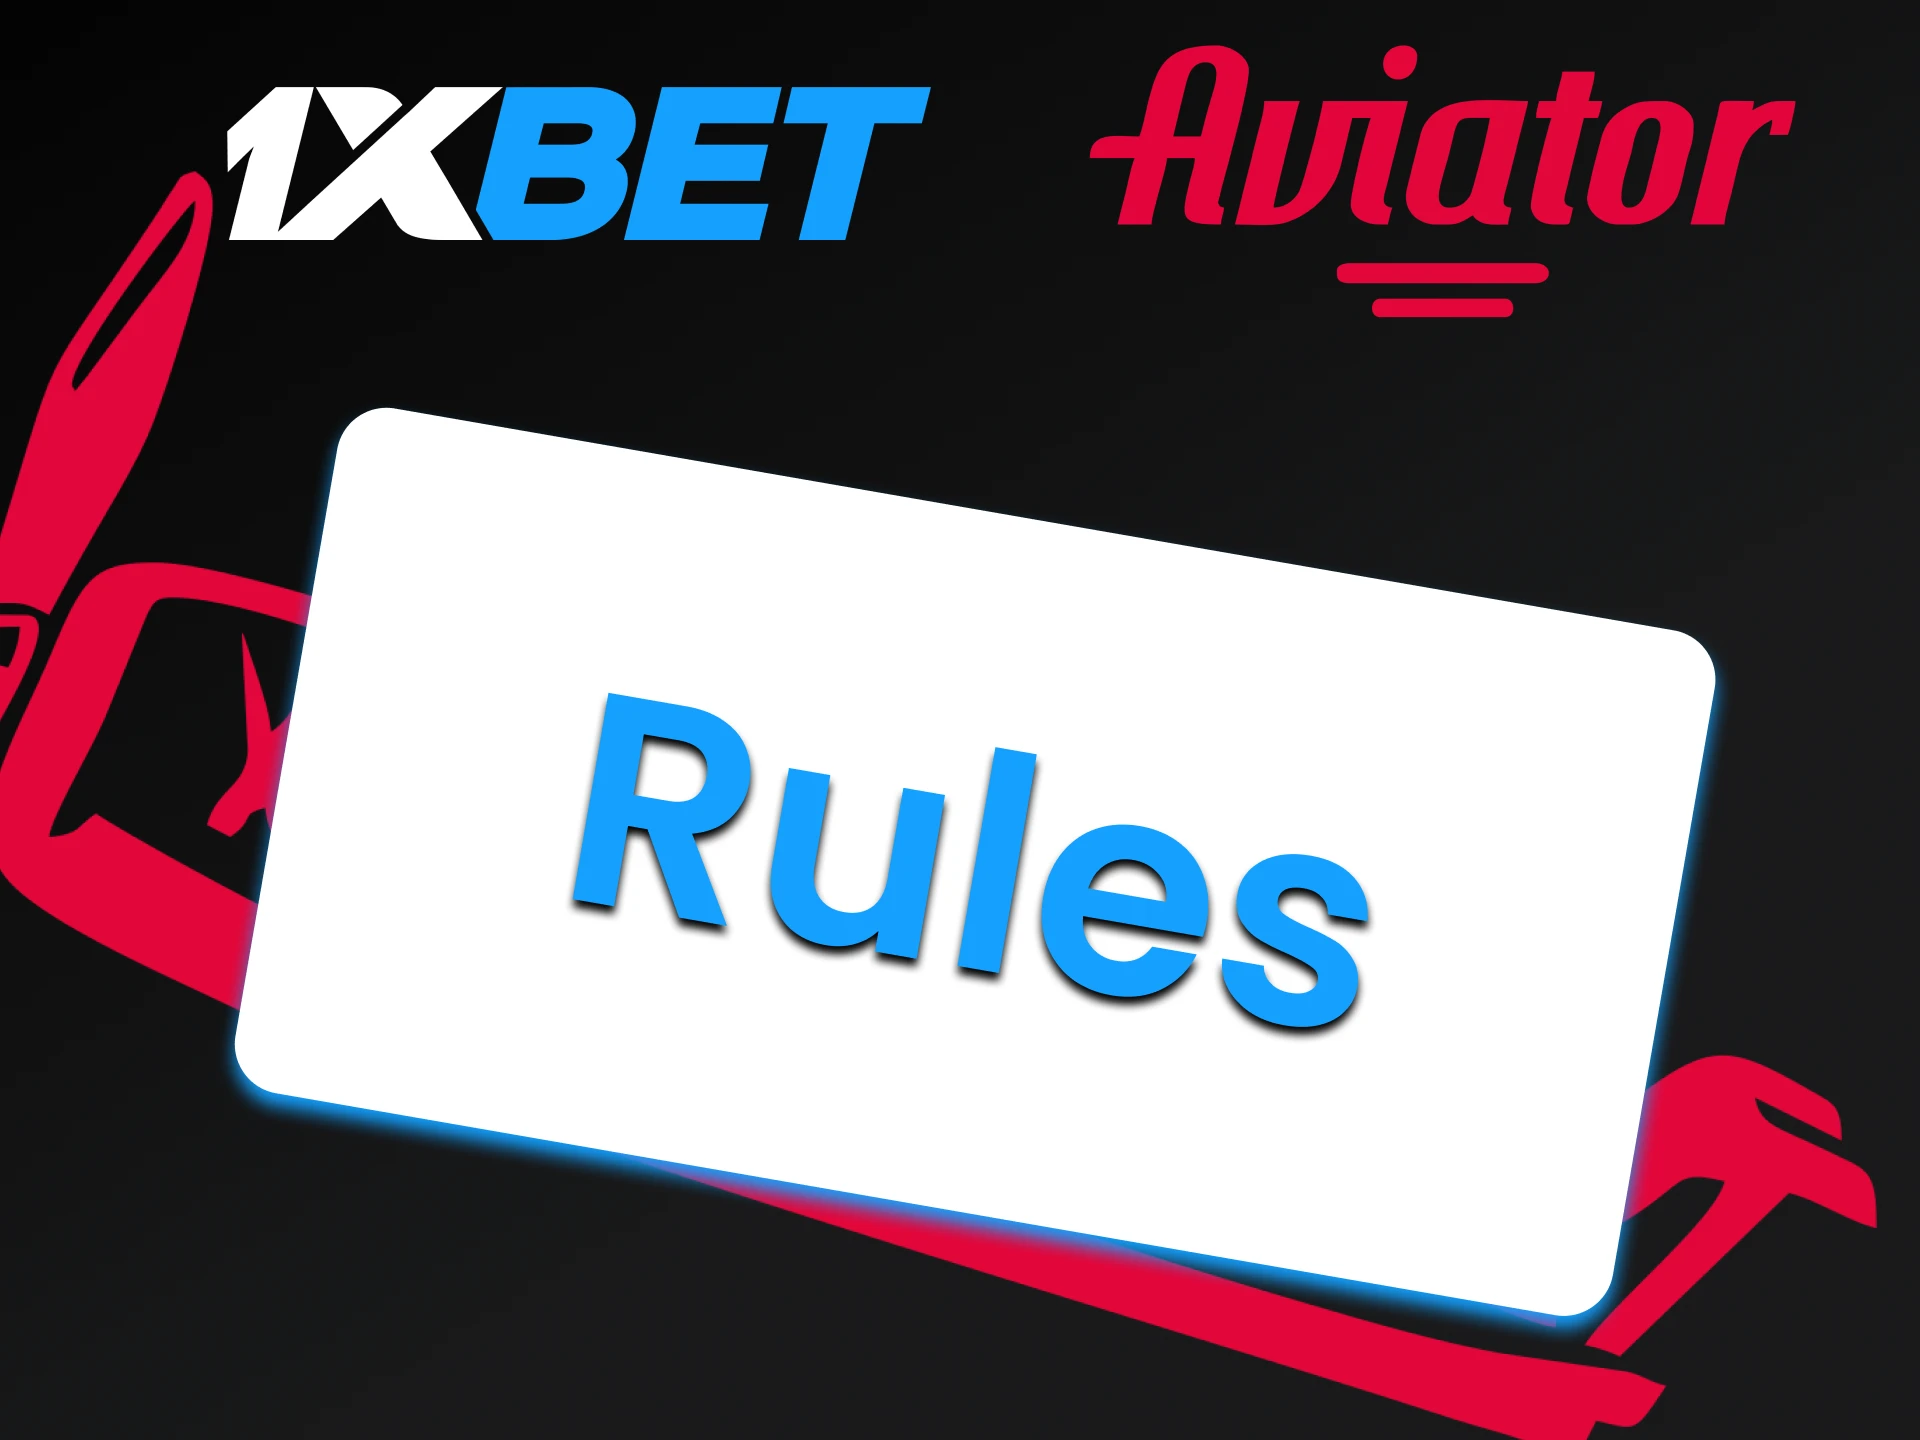 Learn the rules for using the 1xbet service.